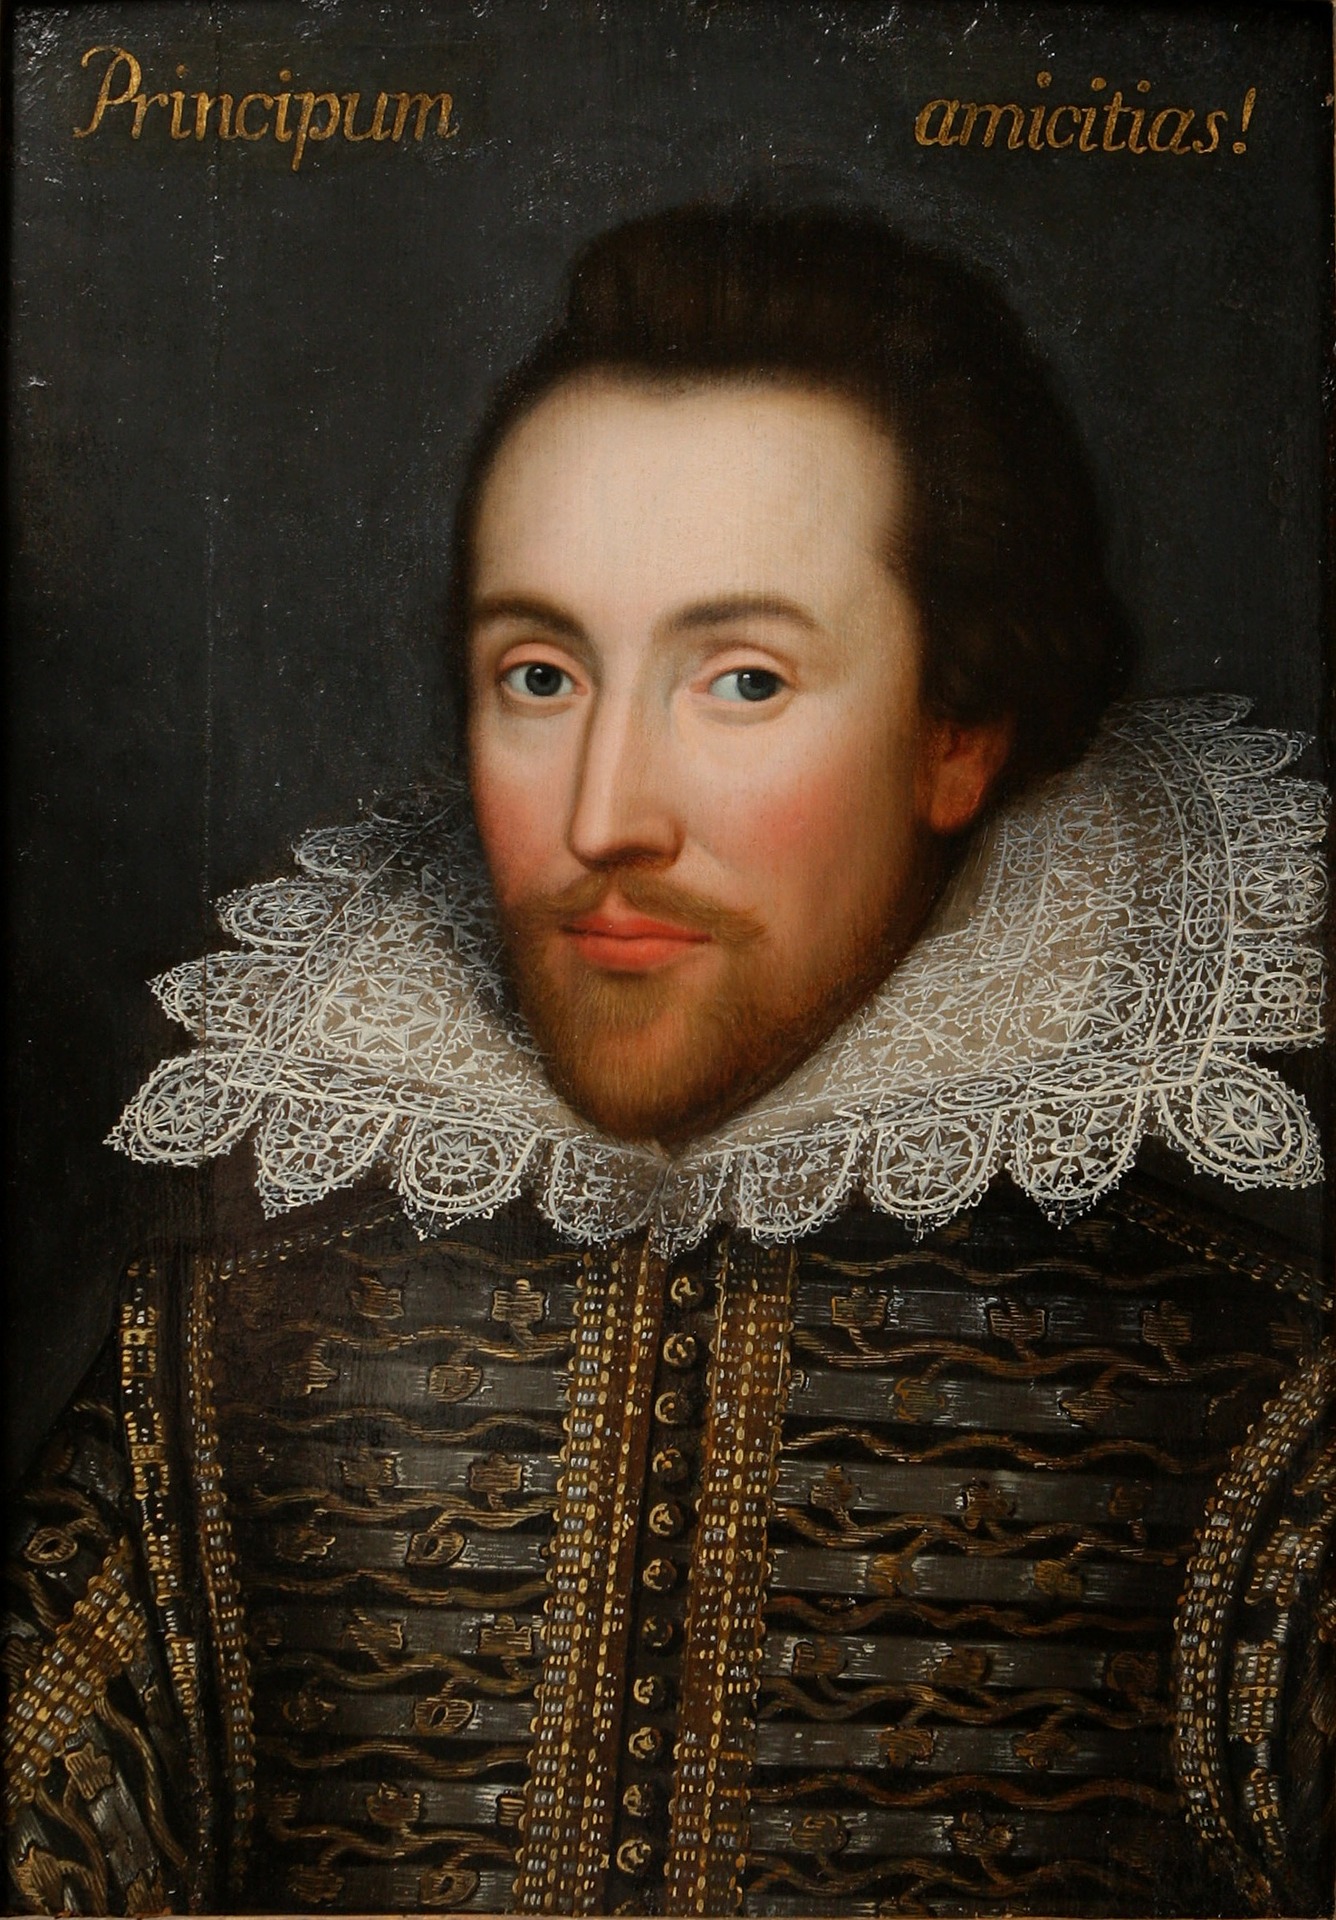 william shakespeare biography died